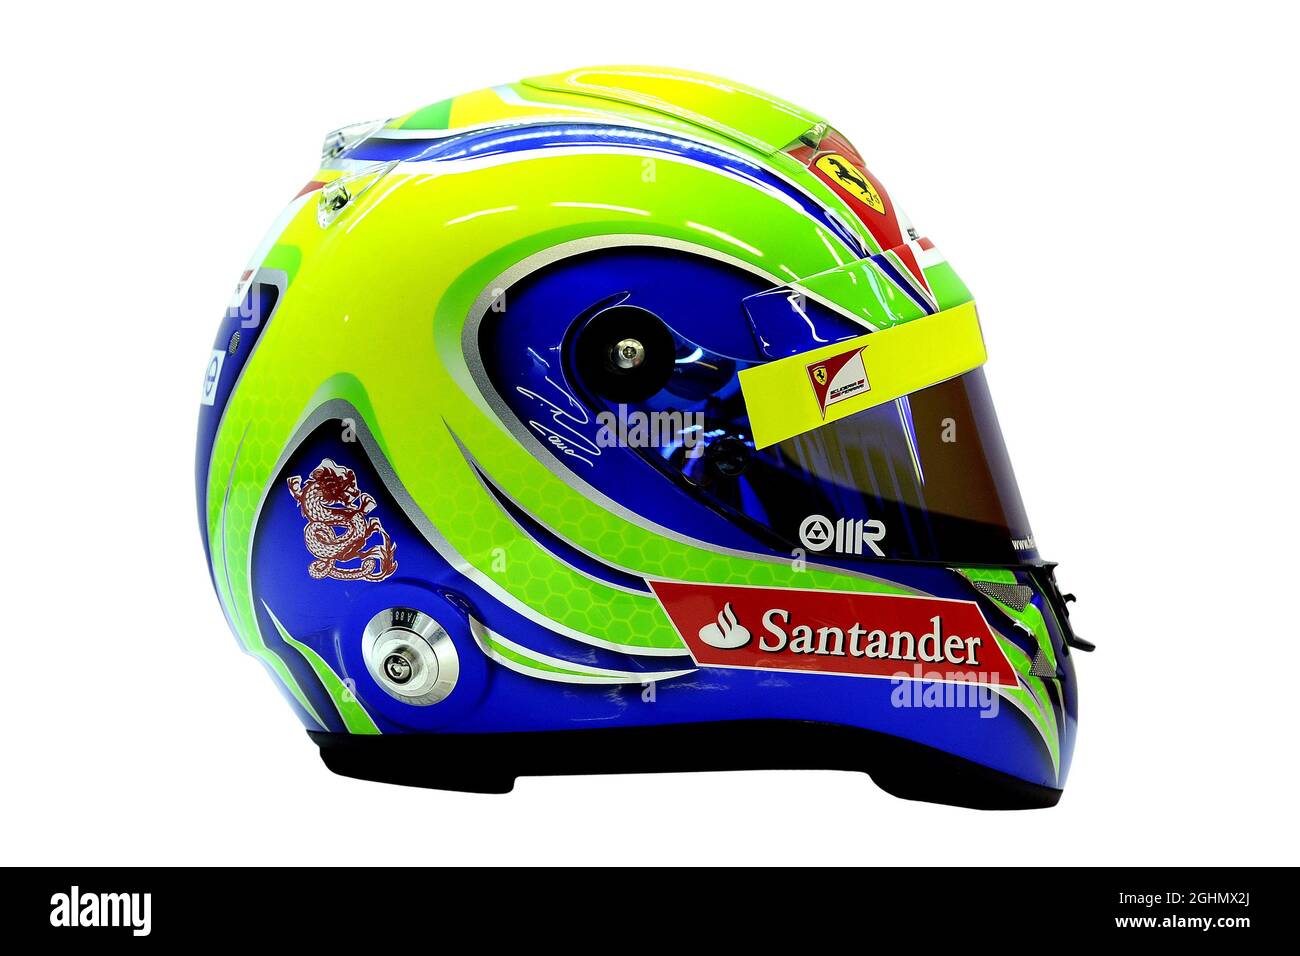 The helmet of felipe massa Cut Out Stock Images & Pictures - Alamy